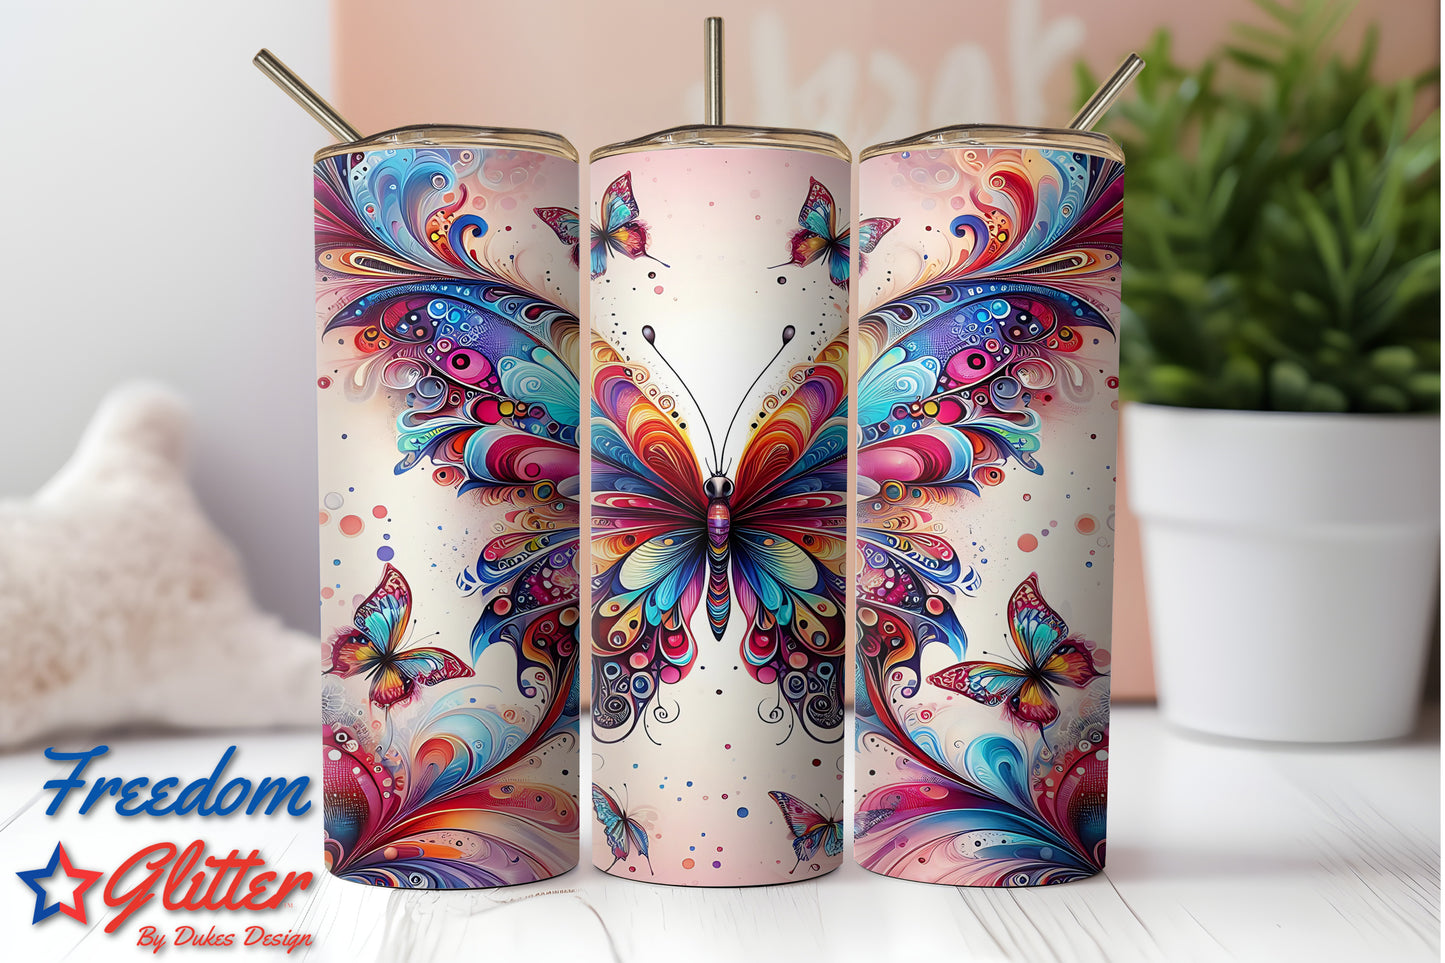 Beautiful Butterfly 1 (Sublimation)